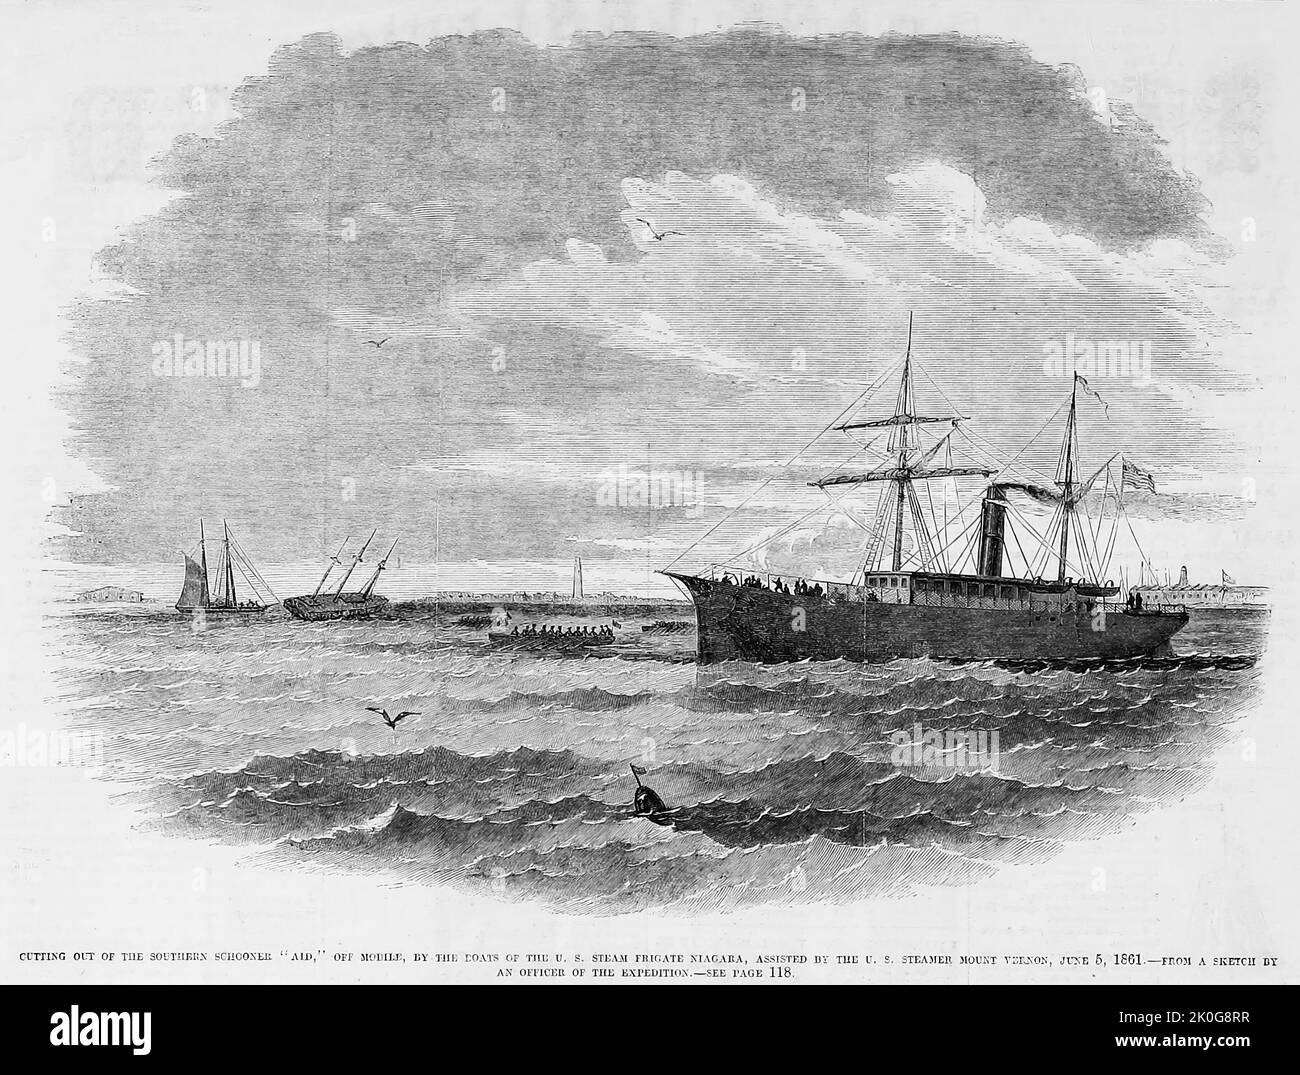 Cutting out of the Southern schooner 'Aid,' off Mobile, Alabama, by the boats of the U.S. steam frigate Niagara, assisted by the U.S. steamer Mount Vernon, June 5th, 1861. 19th century American Civil War illustration from Frank Leslie's Illustrated Newspaper Stock Photo